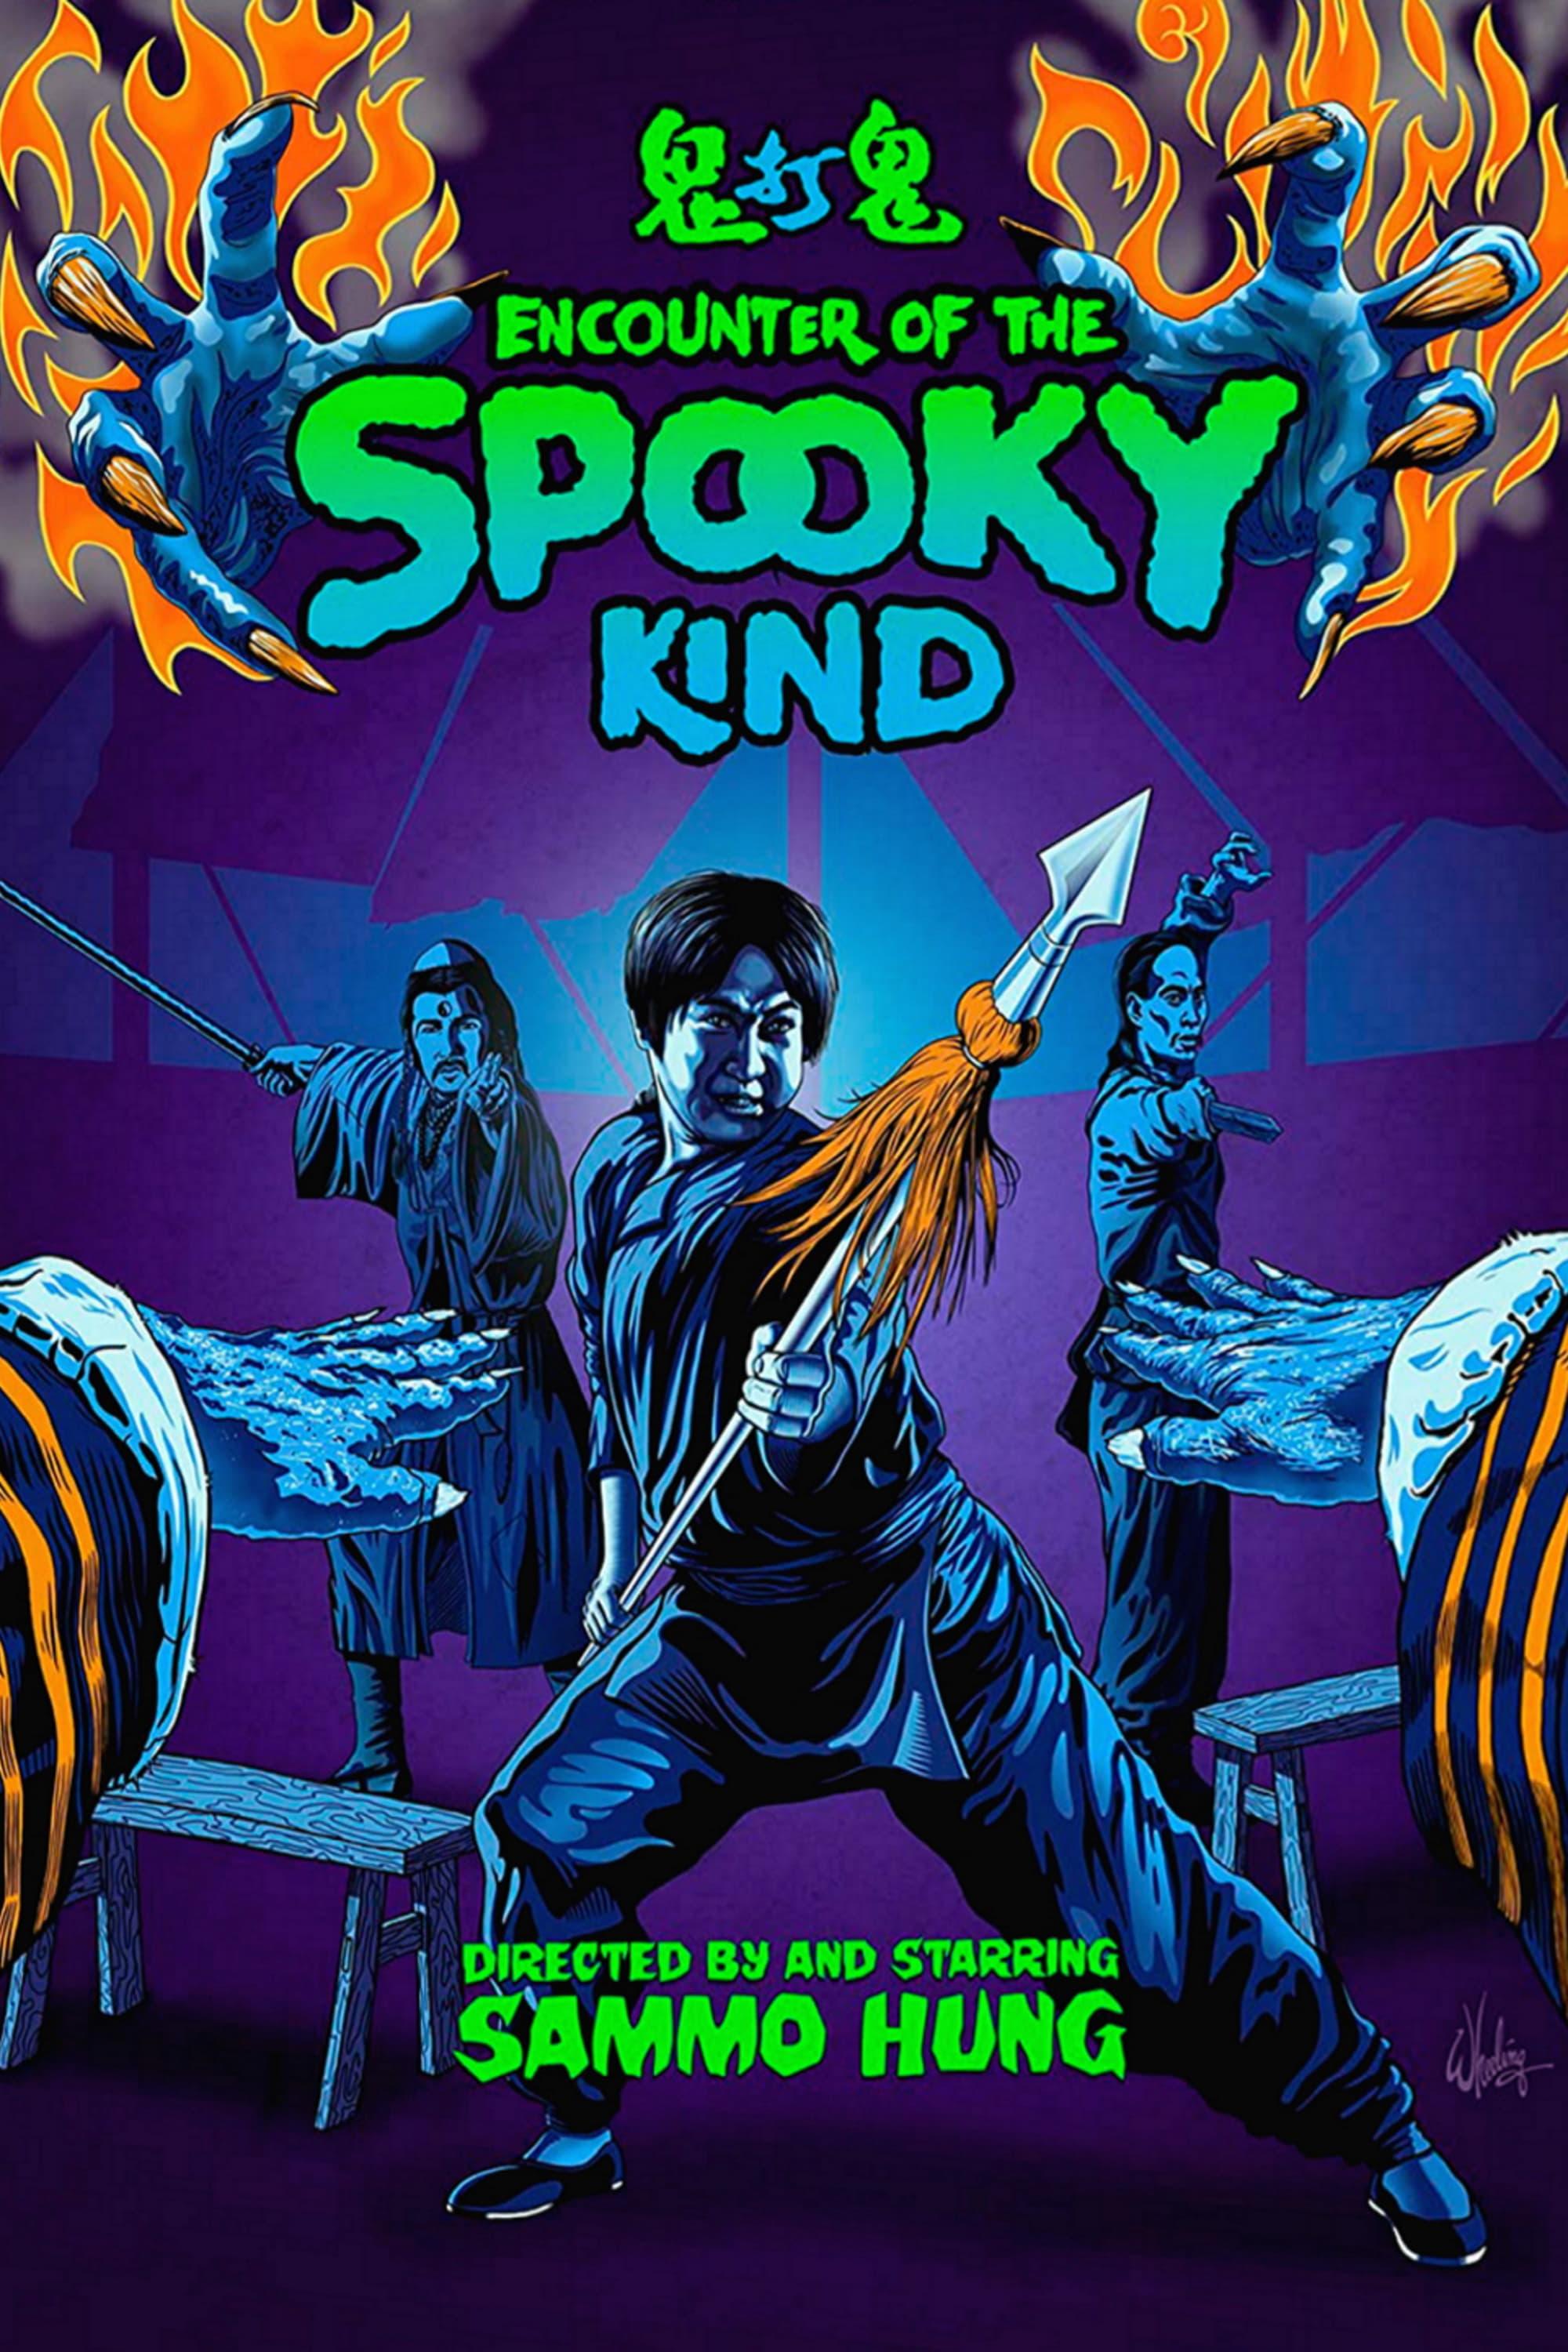 Encounter of the Spooky Kind poster